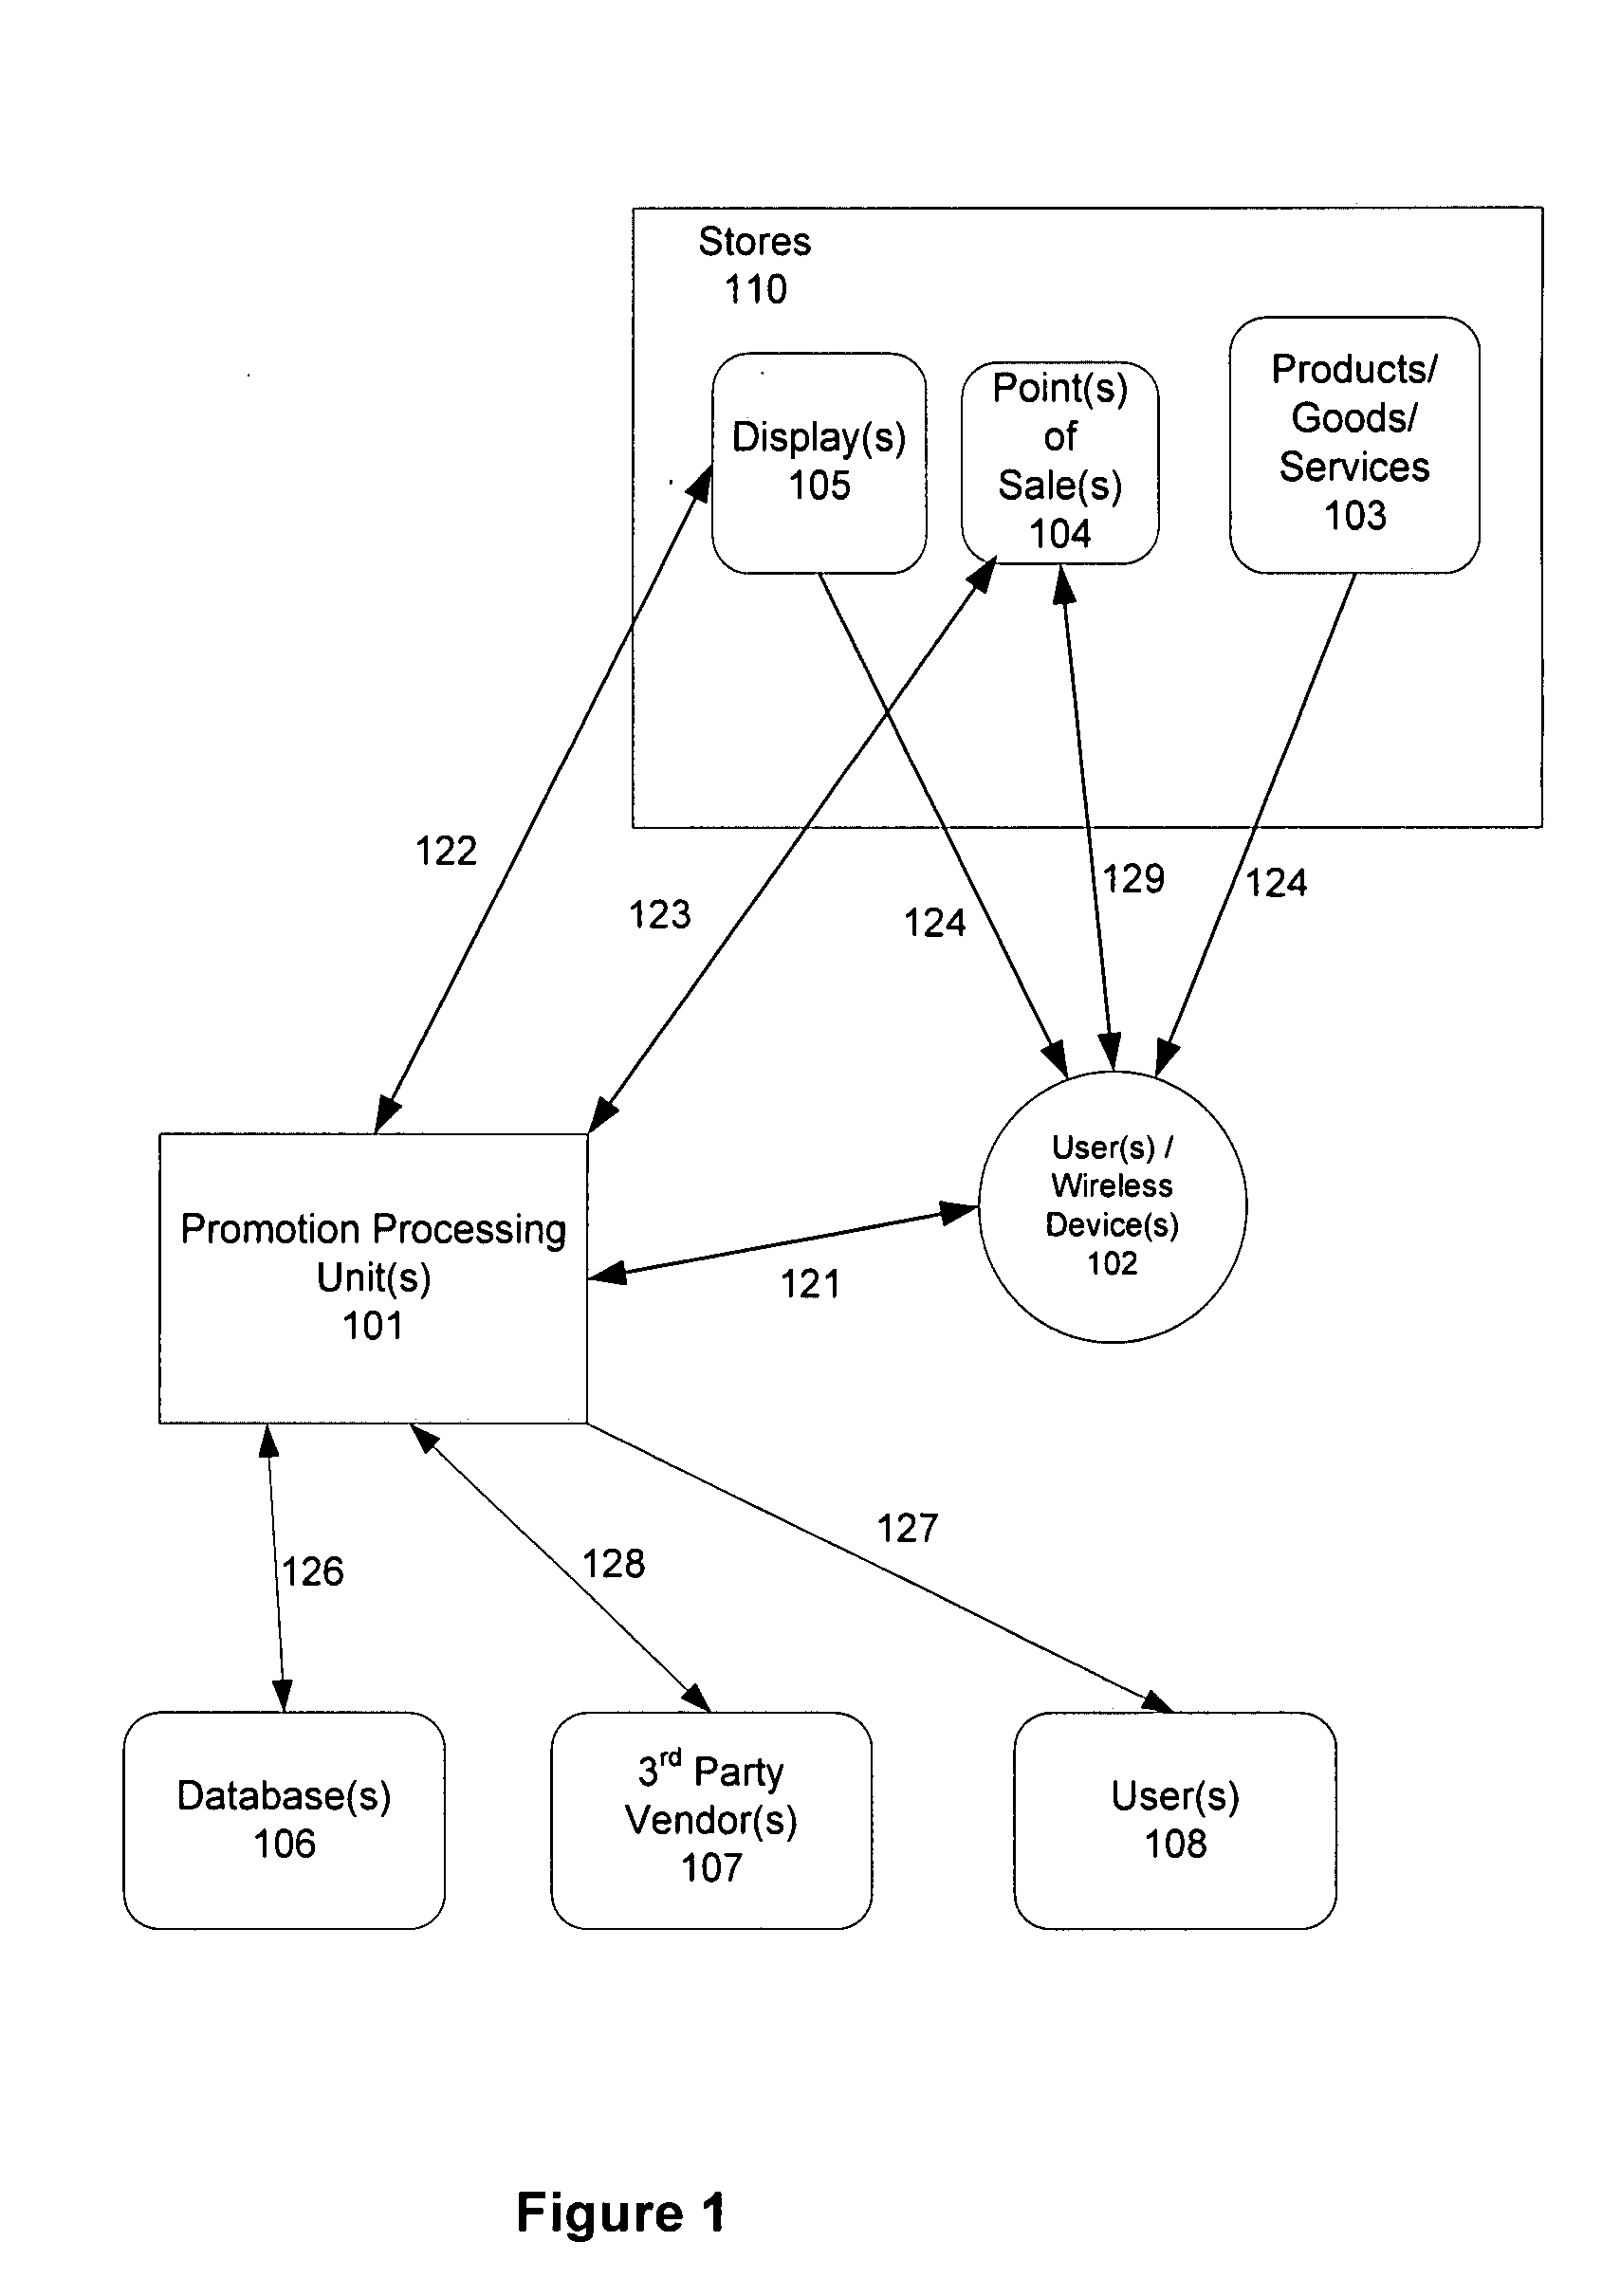 Electronic capture and communication of promotions using a wireless device